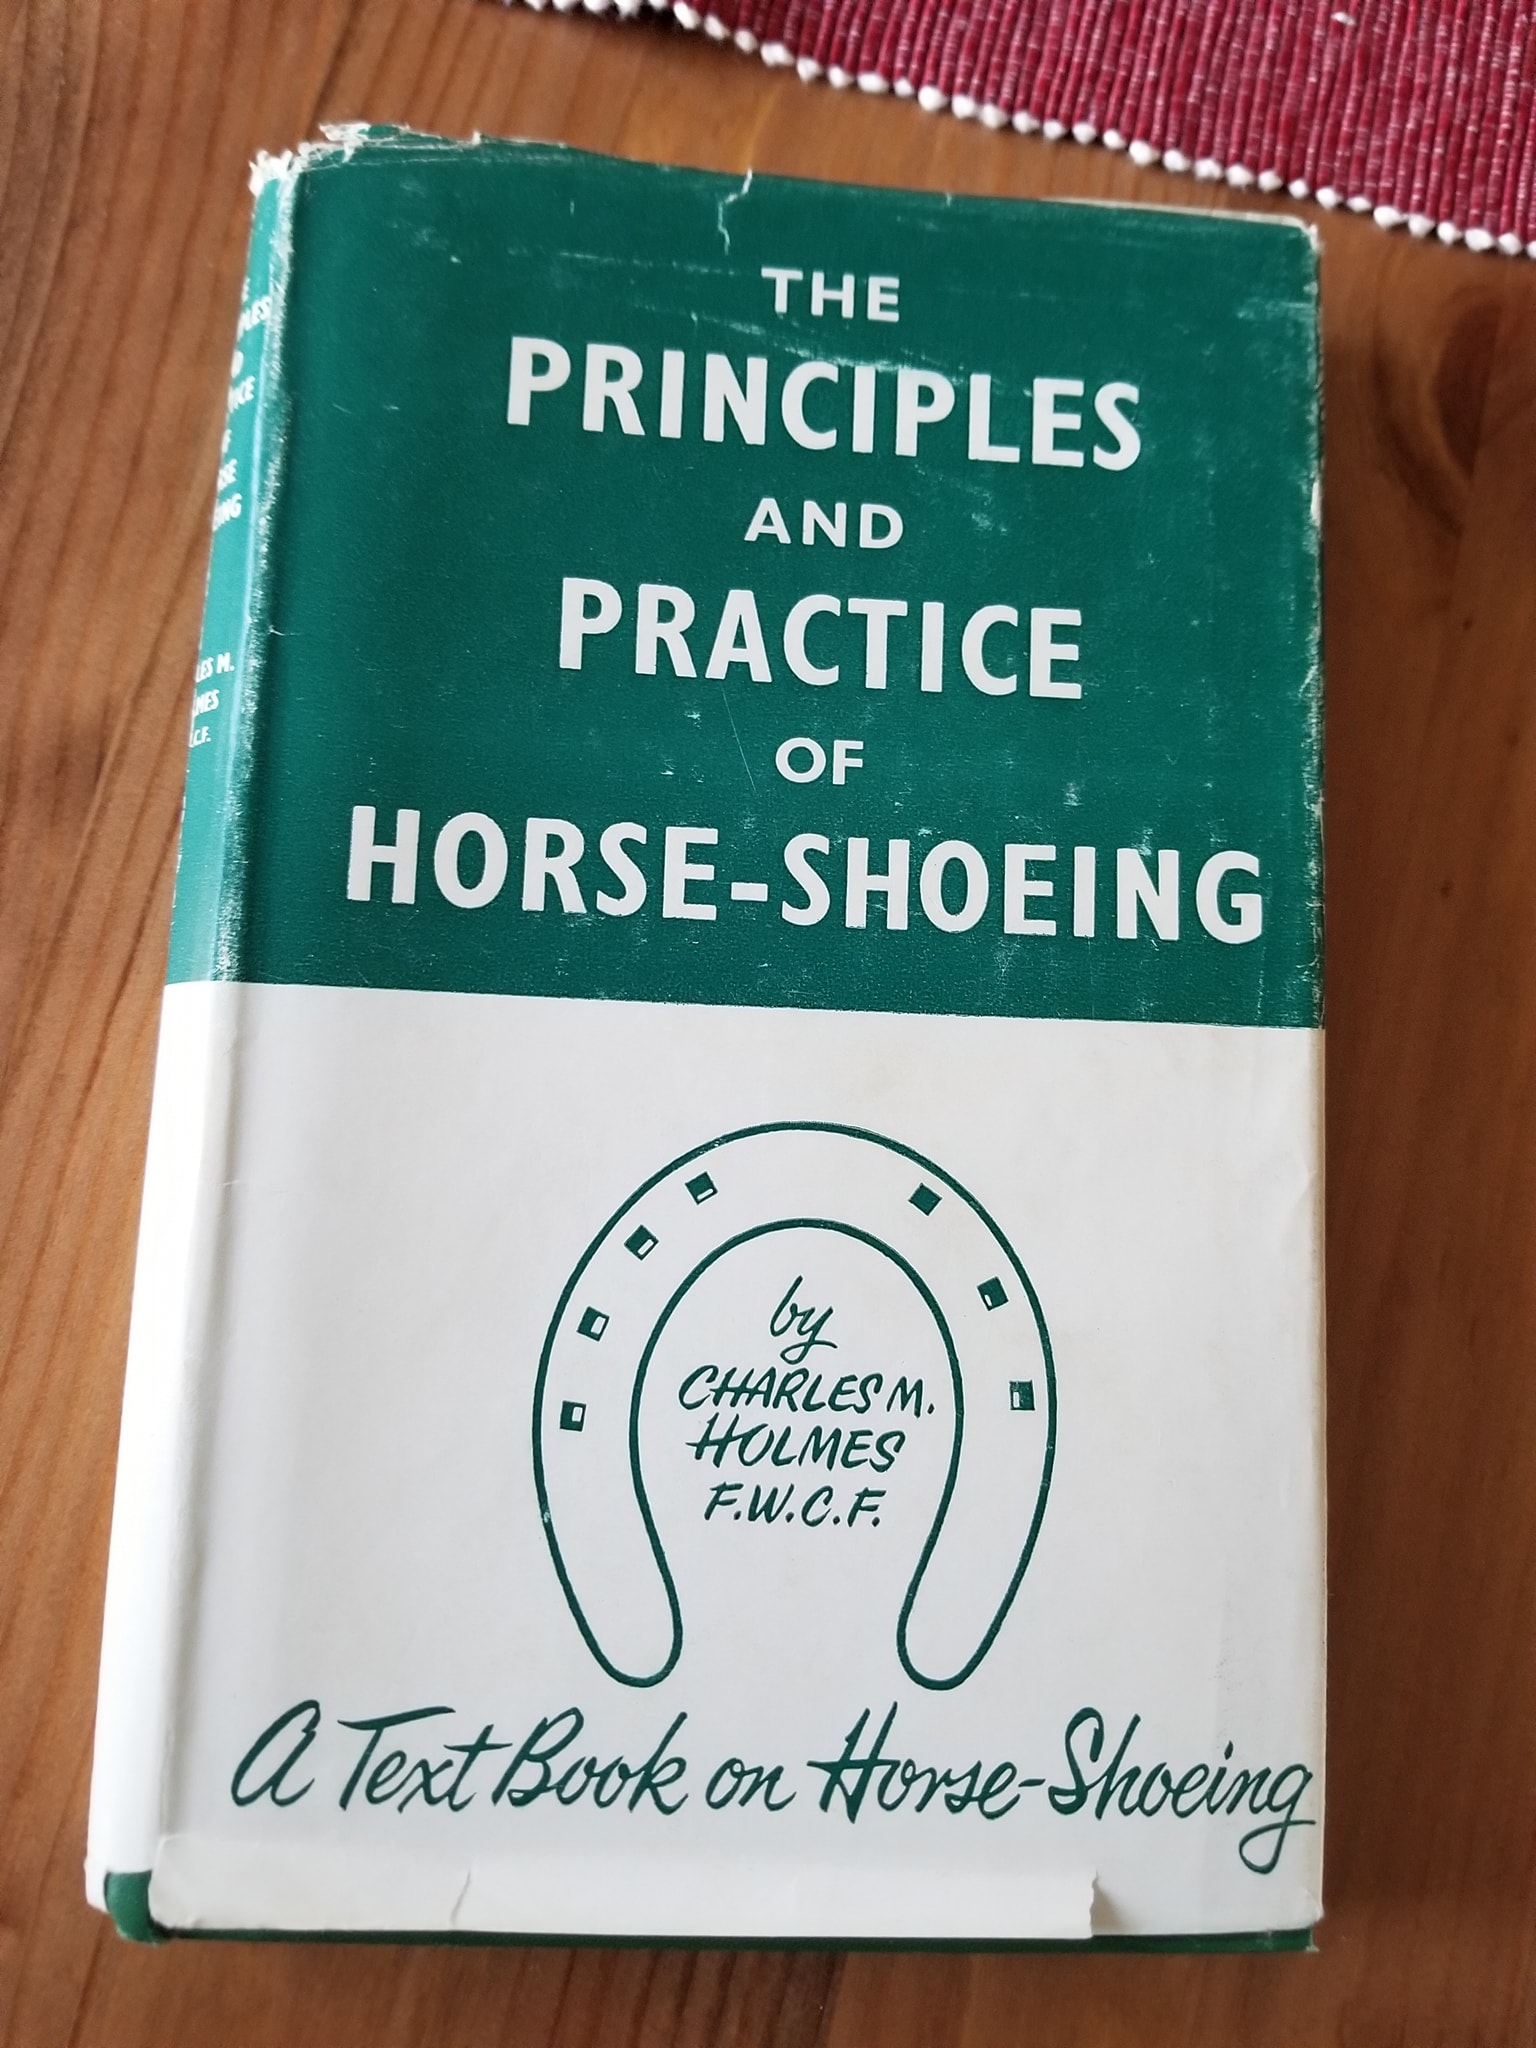 The Principles and Practice of Horse-shoeing